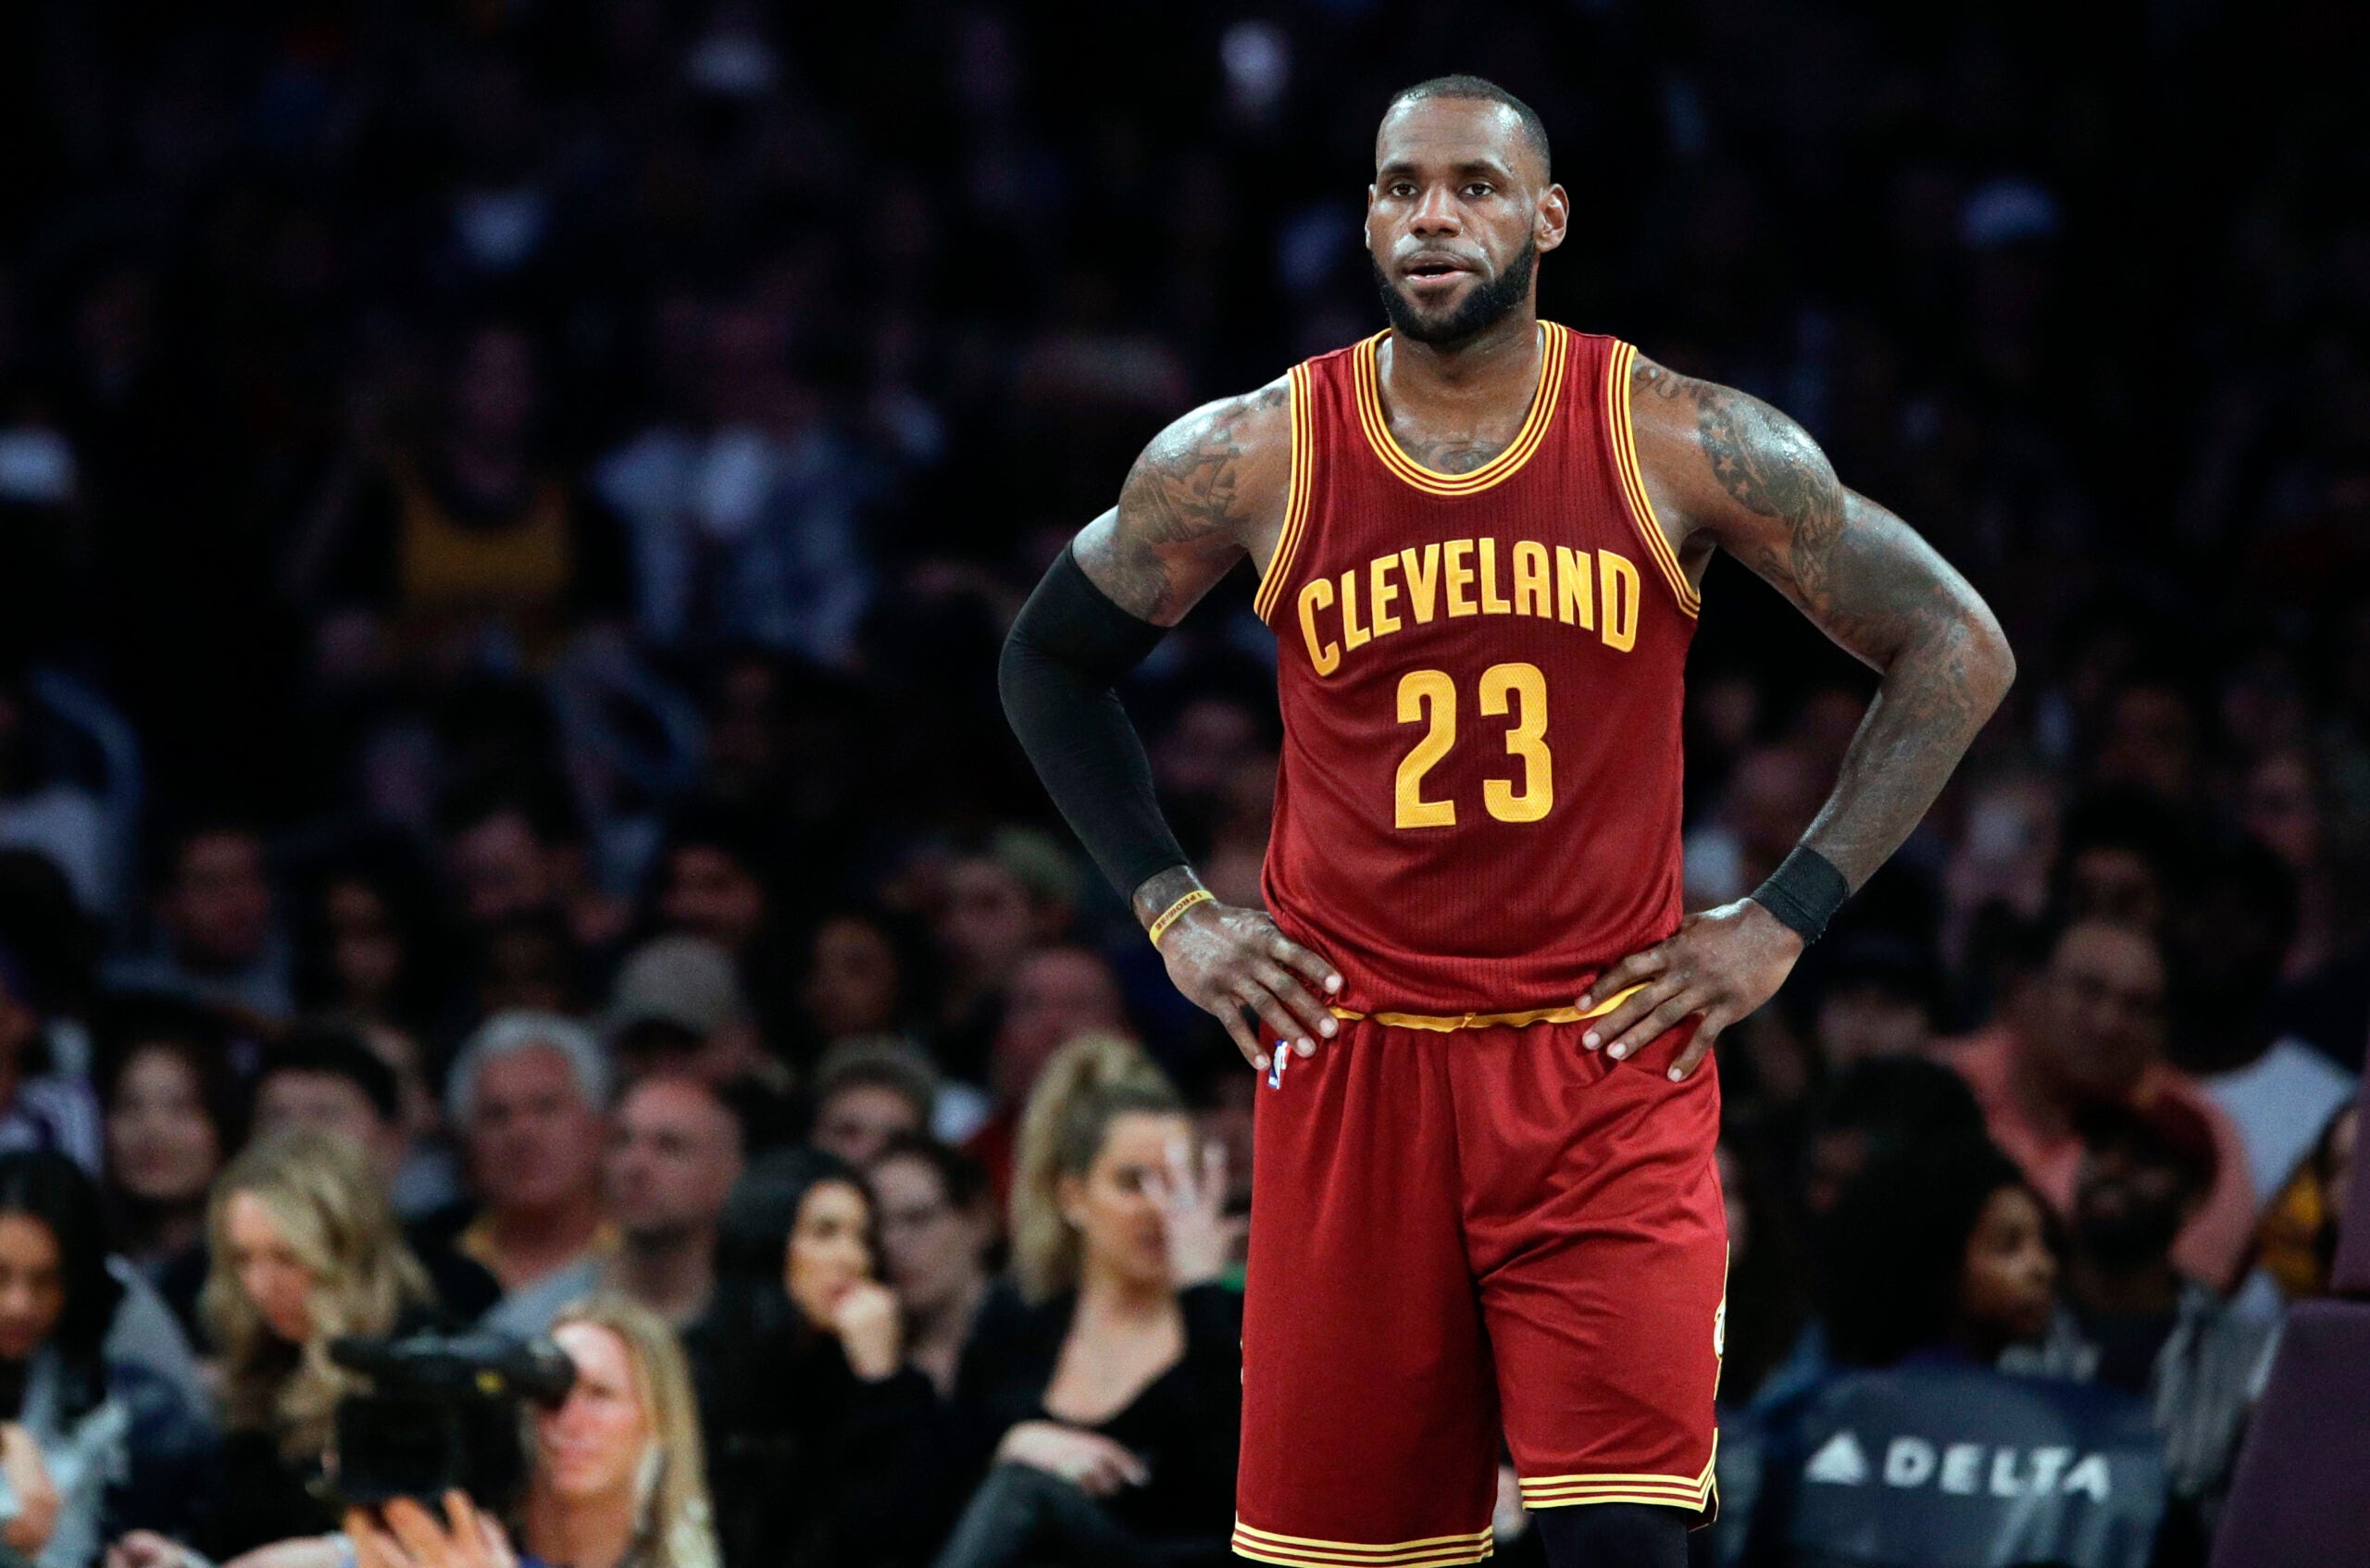 Download Lebron James shows off his Cleveland Cavaliers Jersey